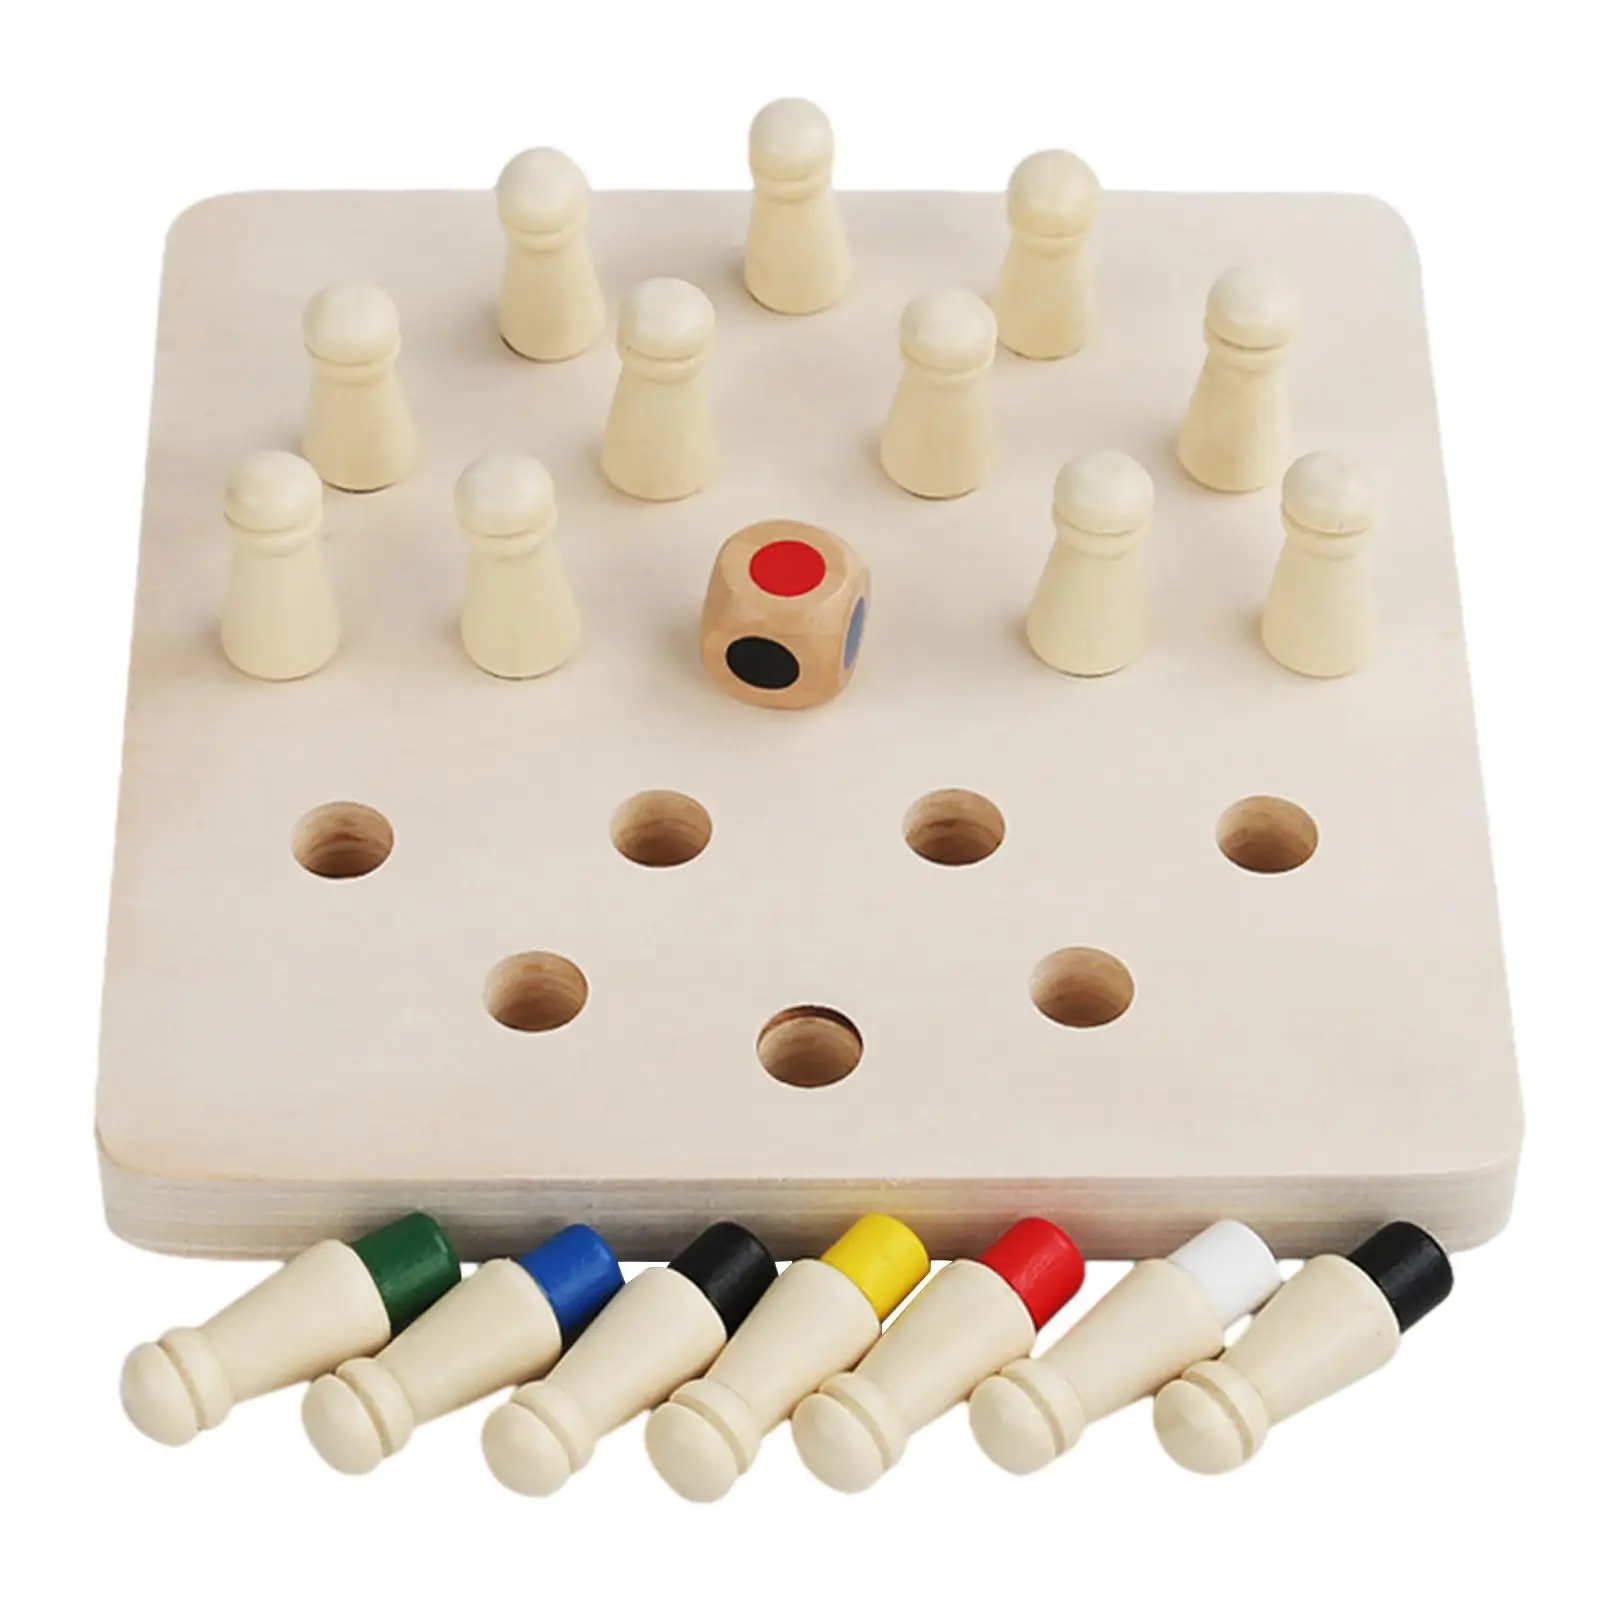 Memory Chess Toys Learning Activities Educational Toys Educational Toys Wooden Memory Chess Game for Toddlers Children Boys Kids